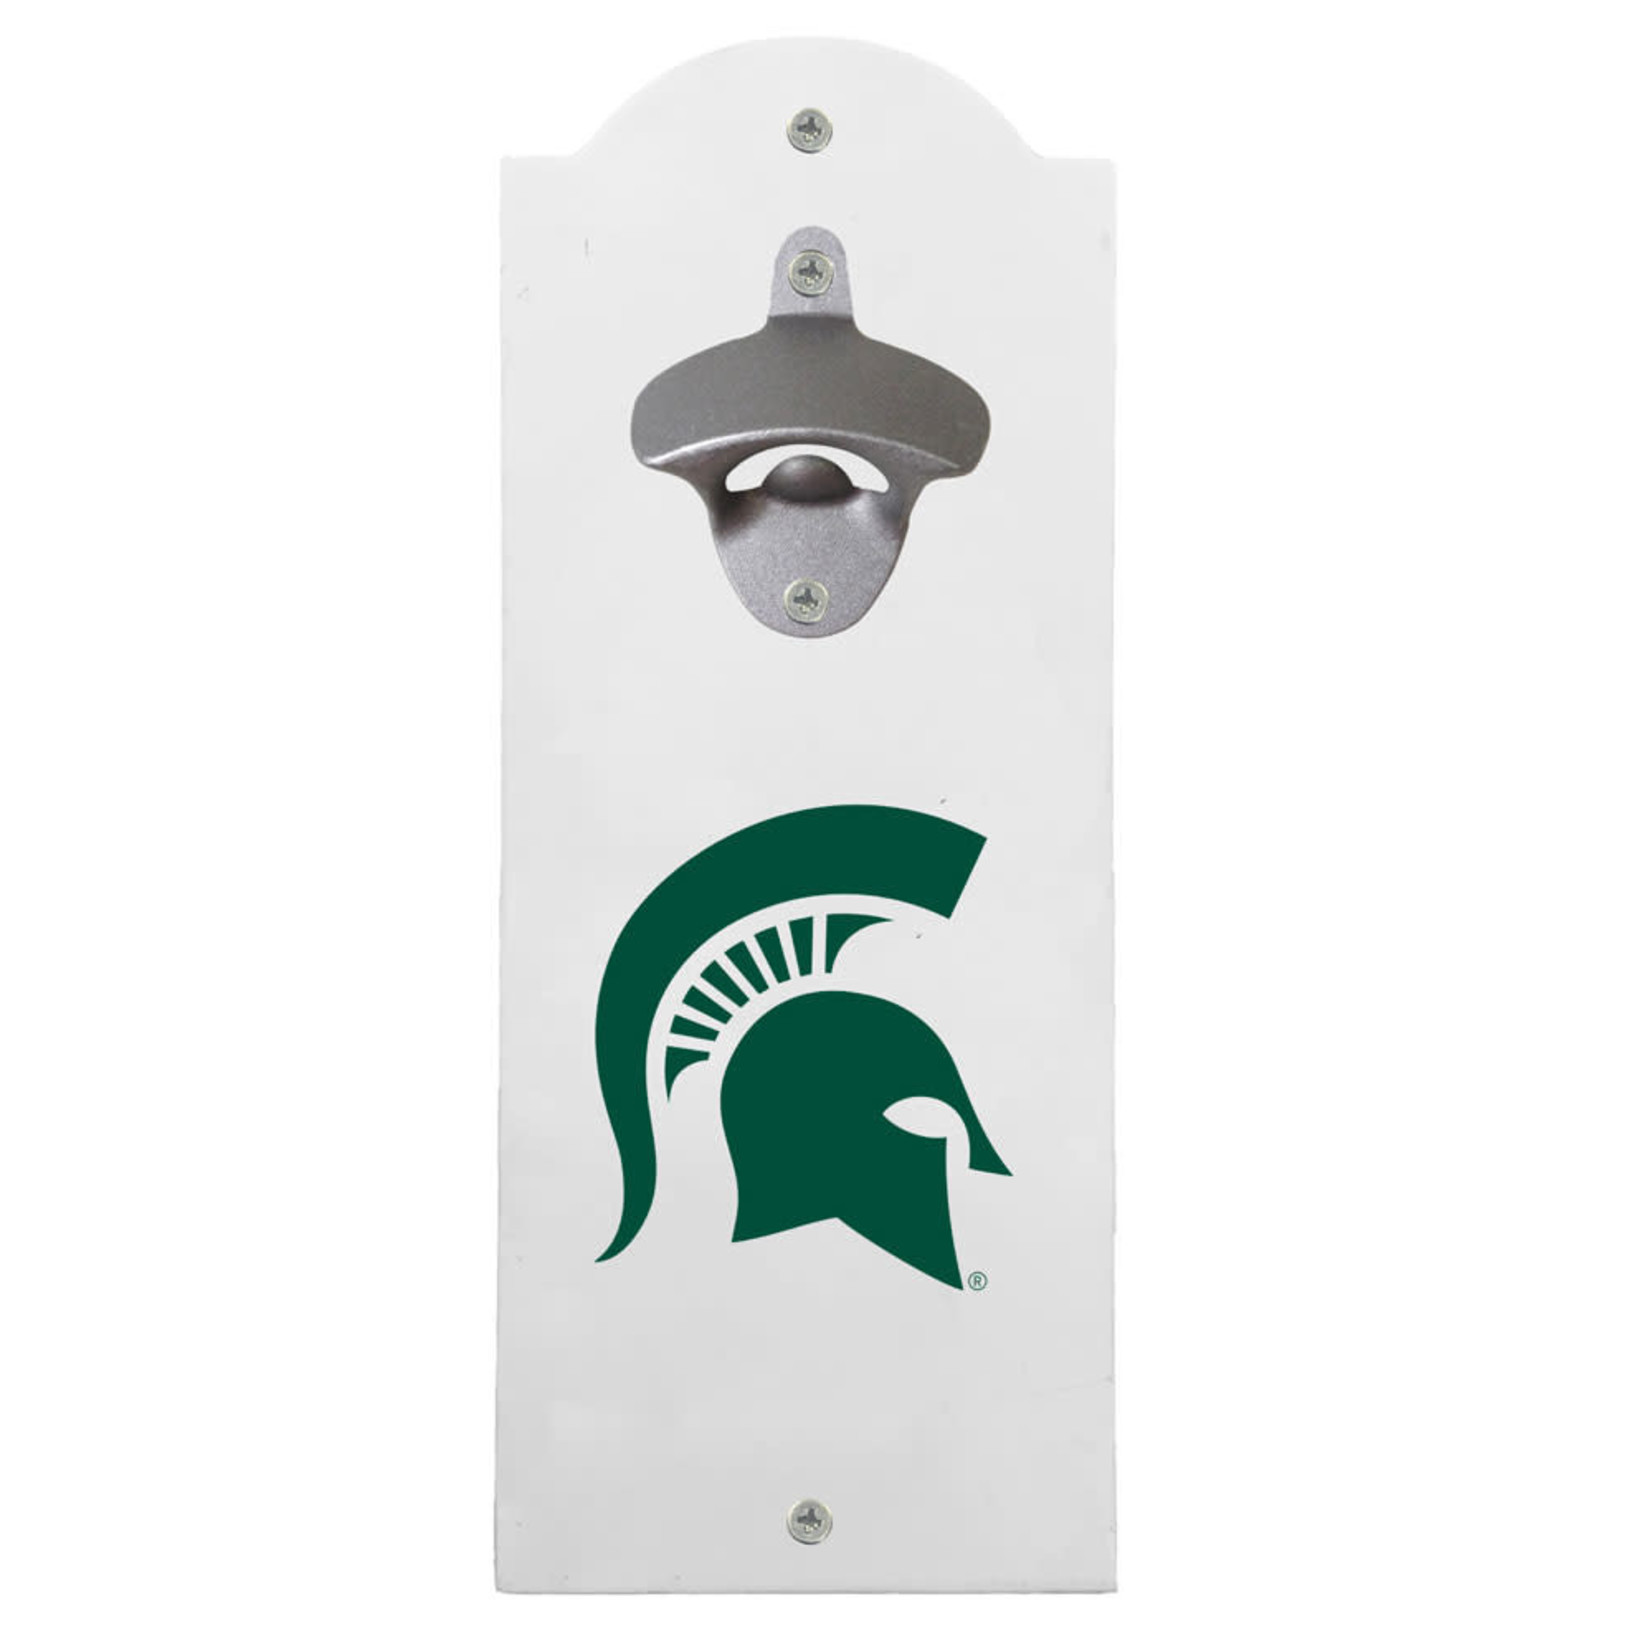 R & R Michigan State Spartans Wall Mounted Bottle Opener